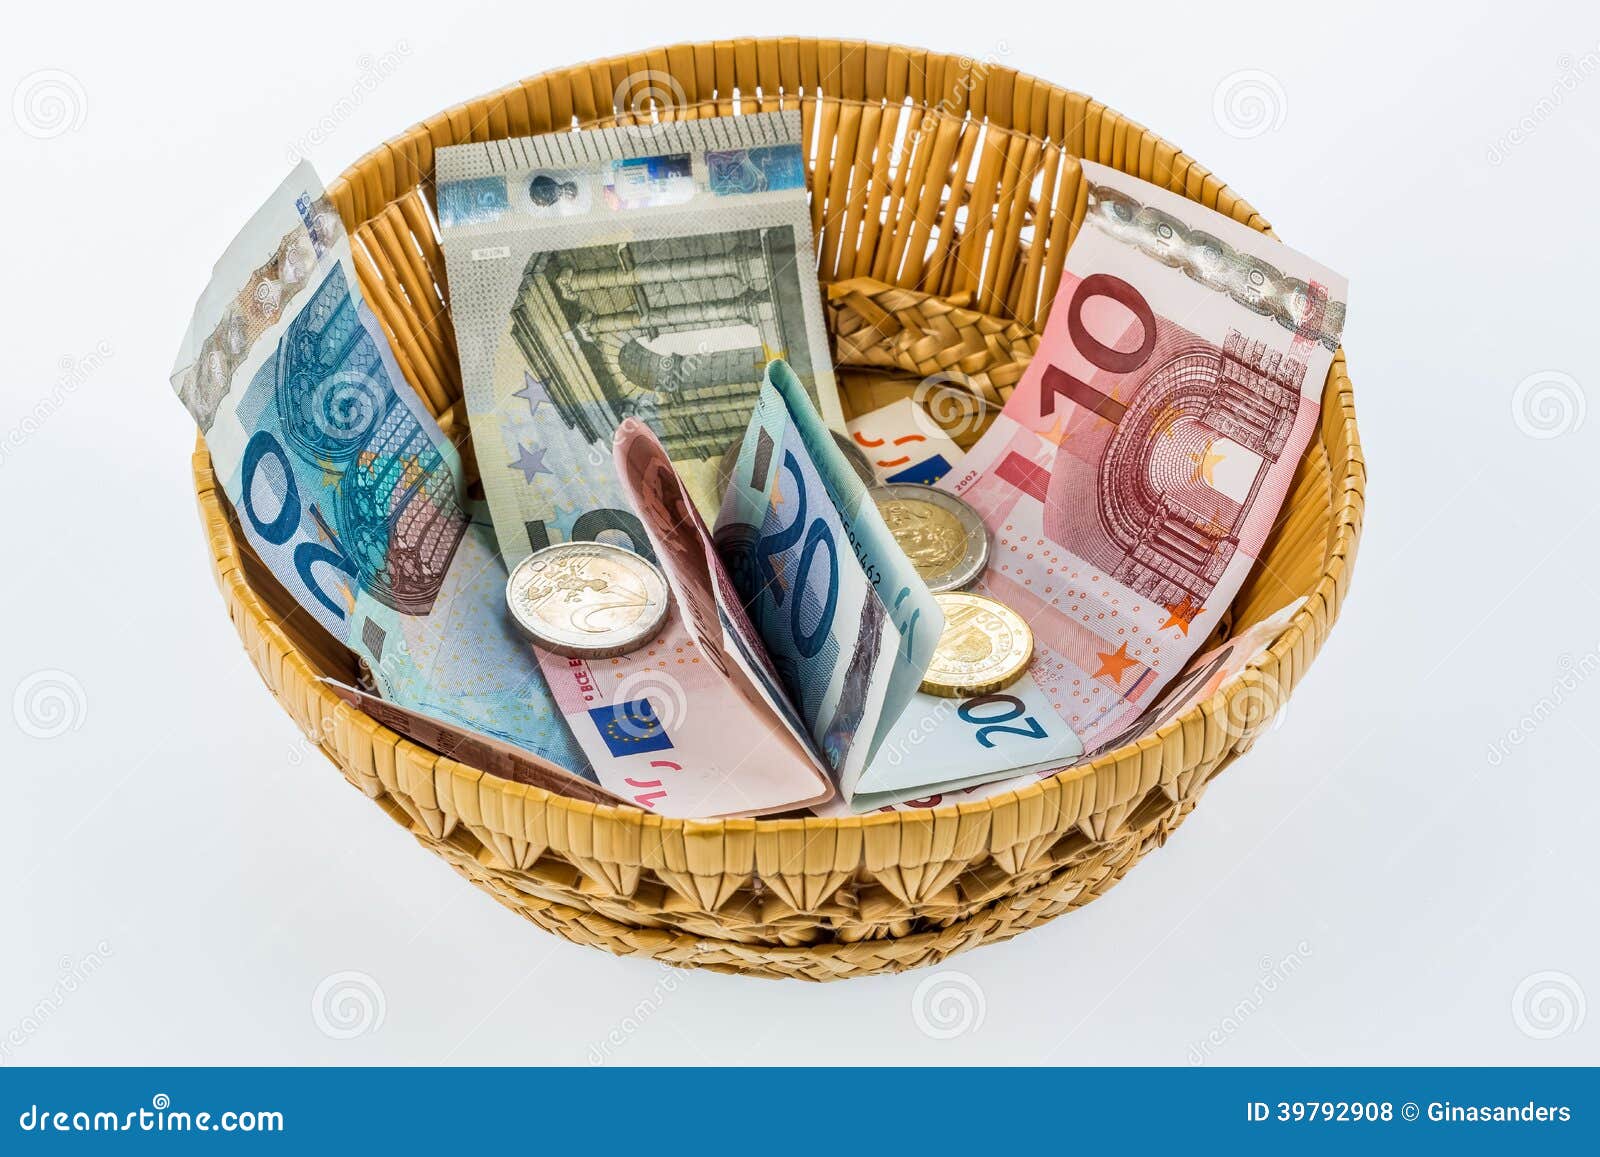 basket with money from donations